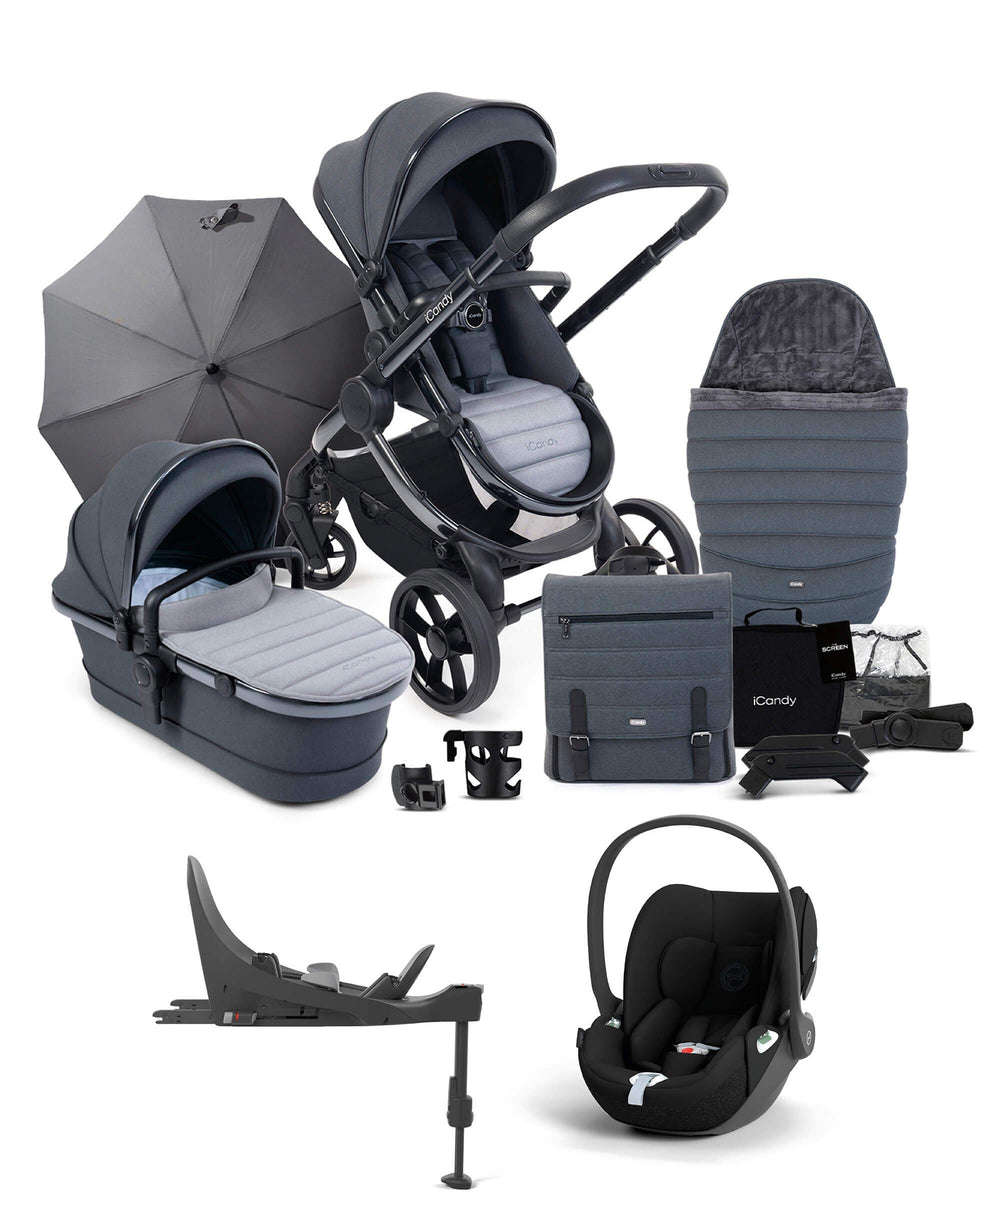 iCandy Pushchairs iCandy Peach 7 Pushchair Bundle with Cloud T Car Seat and Base in Truffle